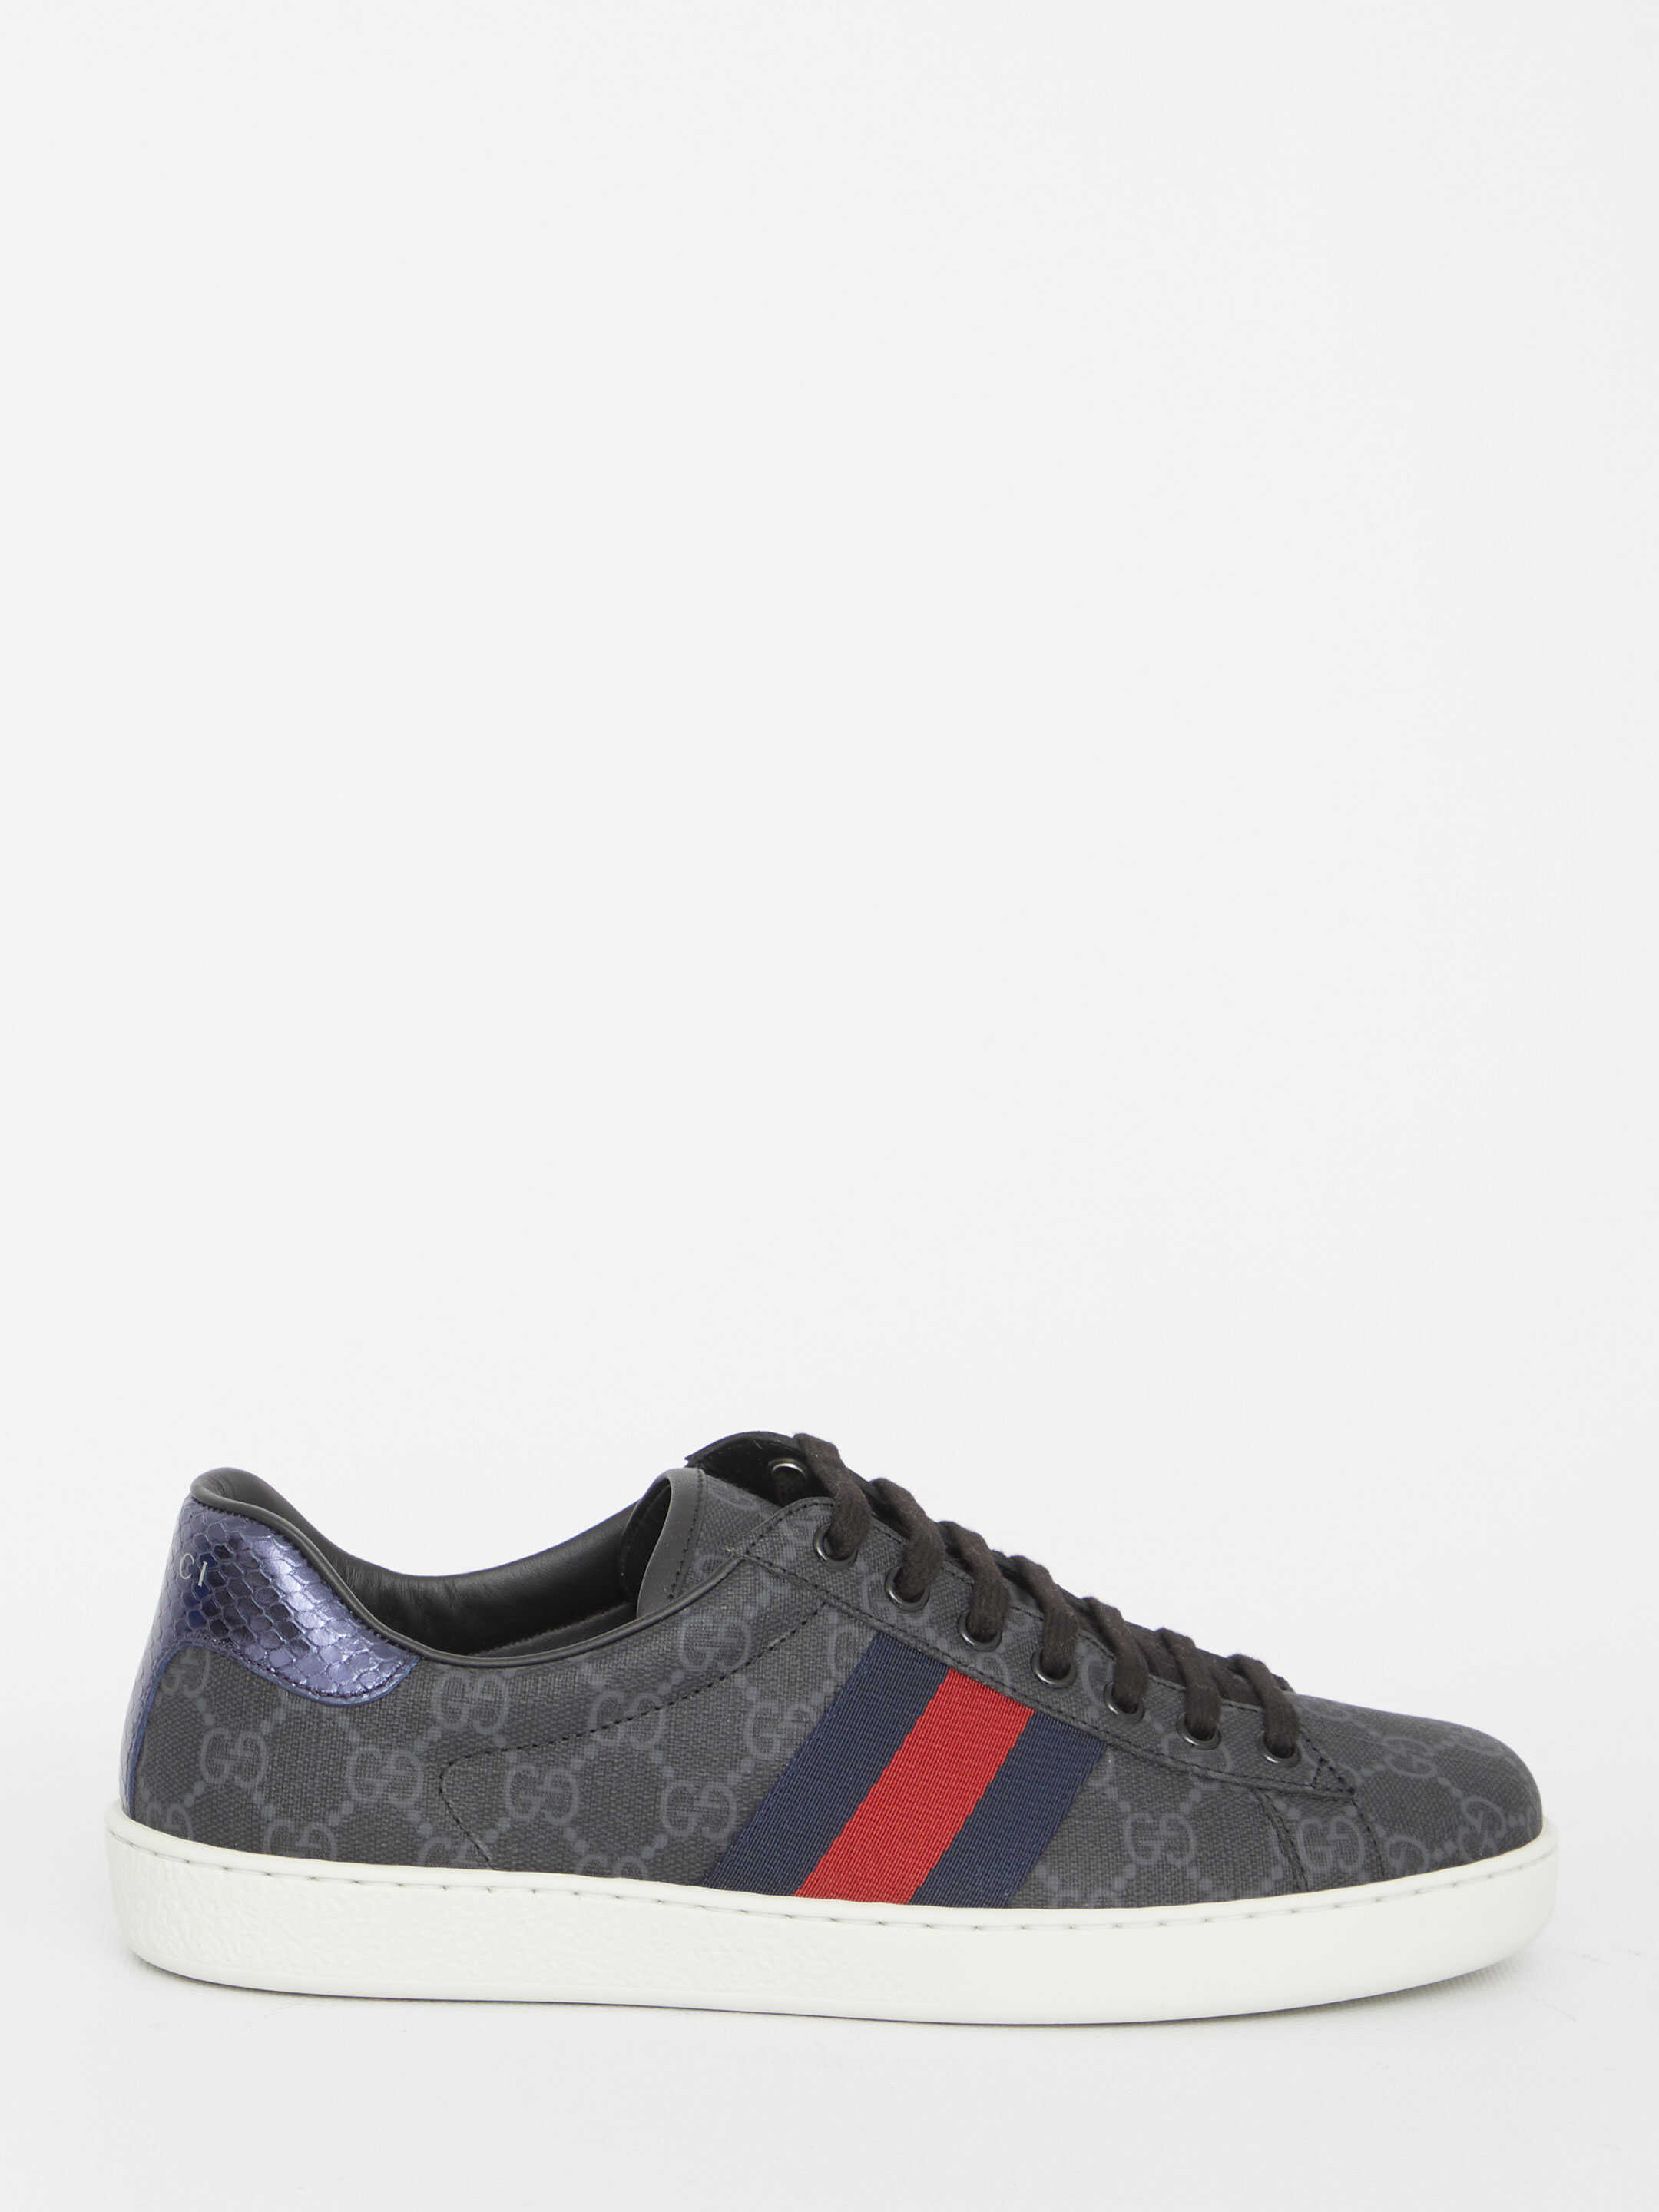 Gucci Ace Sneakers BLACK